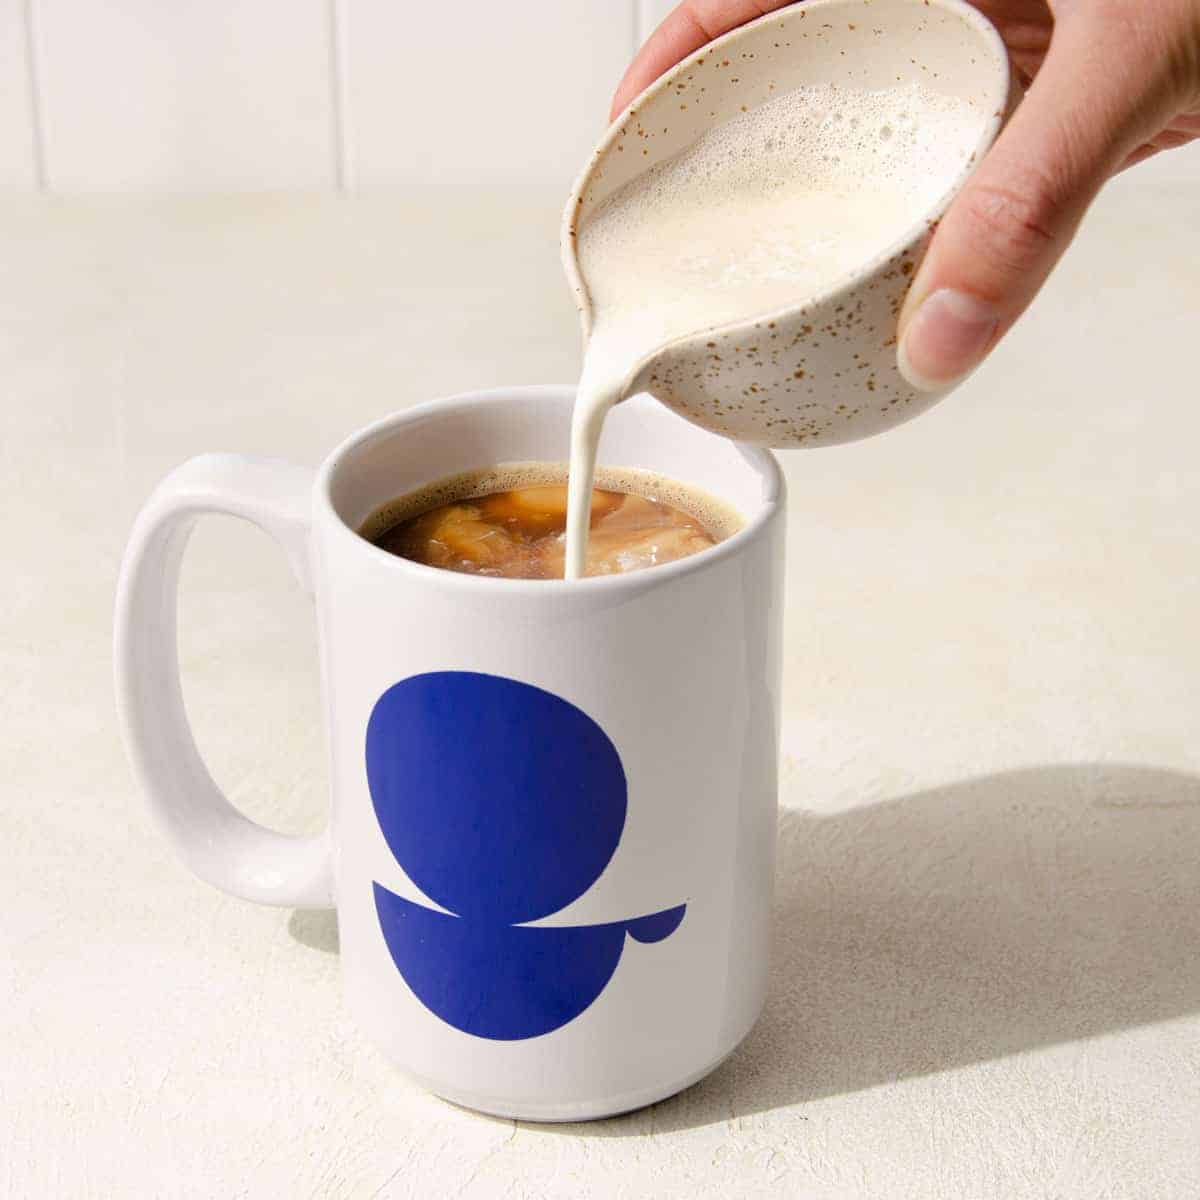 A hand pouring milk into a white mug filled with coffee.